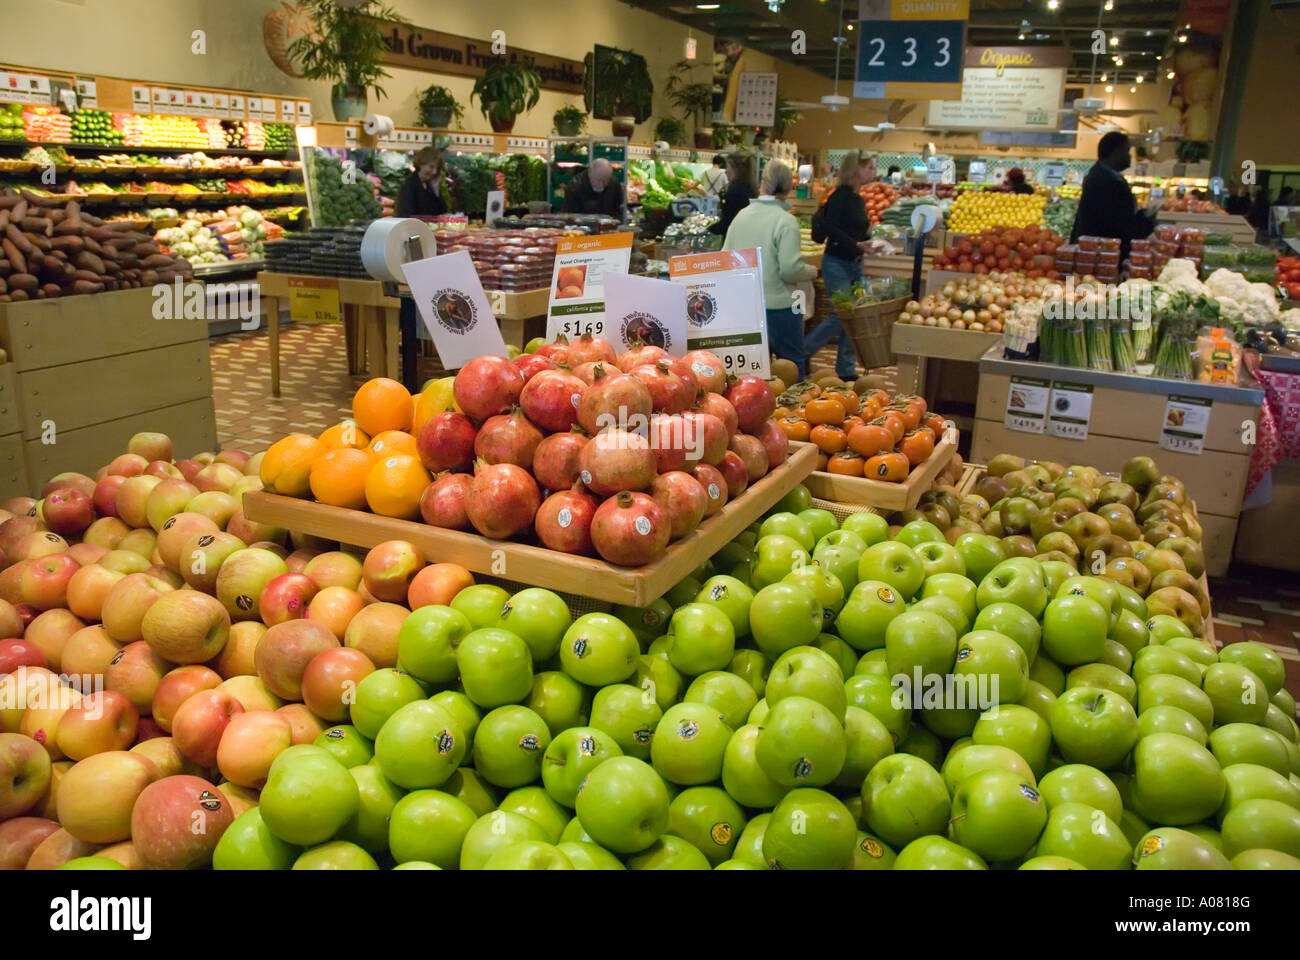 https://c8.alamy.com/comp/A0818G/organic-fruit-and-vegetables-whole-foods-market-annapolis-maryland-A0818G.jpg